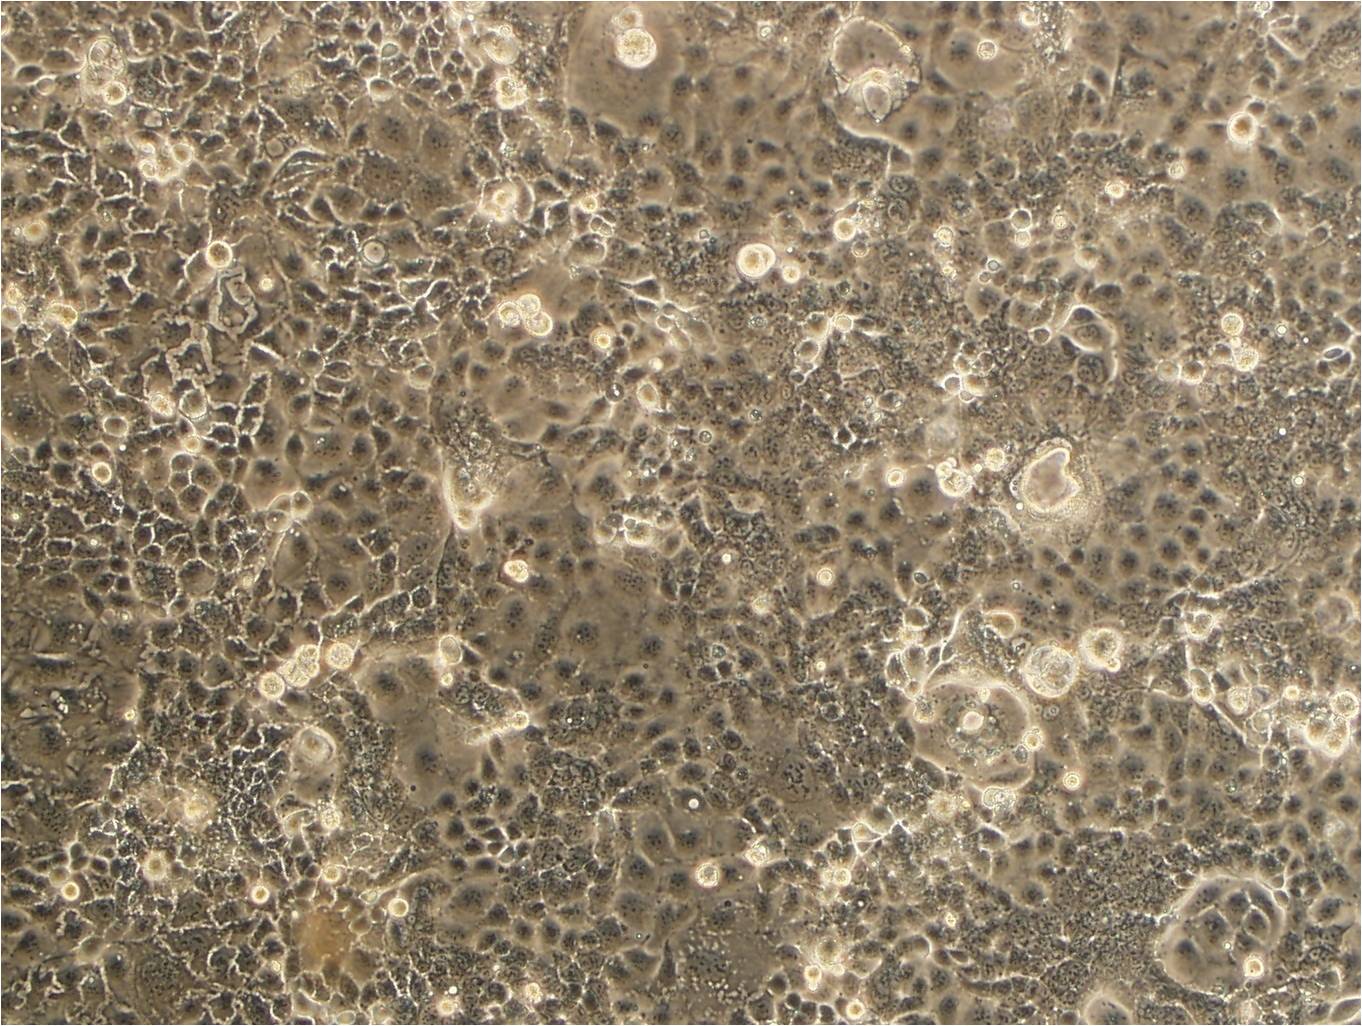 MDA-MB-361 Epithelial Cell|人乳腺癌传代细胞(有STR鉴定),MDA-MB-361 Epithelial Cell